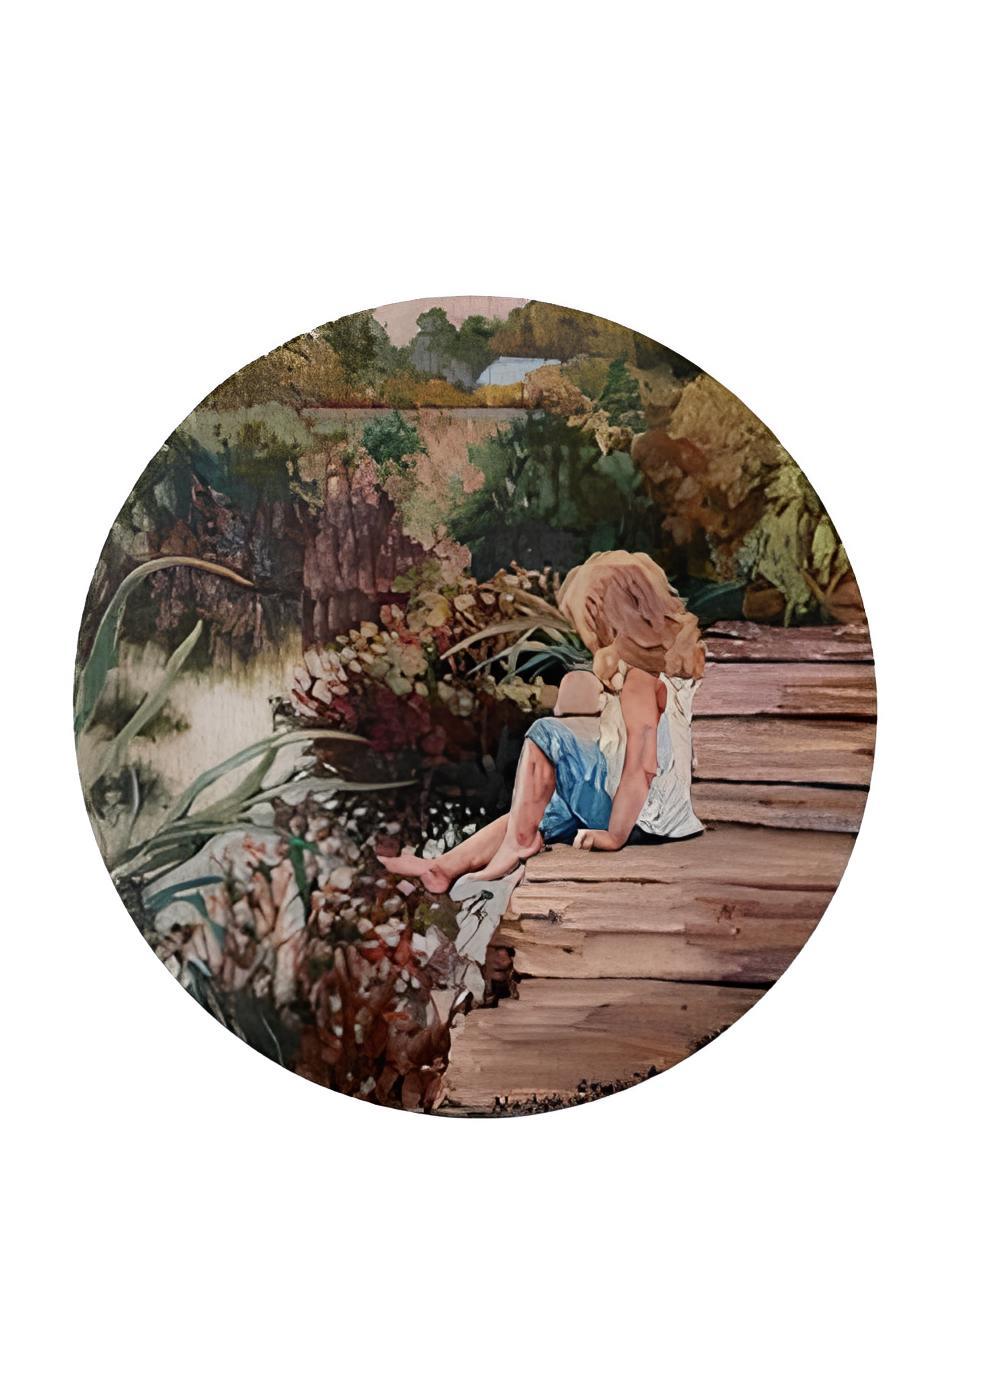 Summer stories. At the  overgrown pond - Painting by Nadezda Stupina